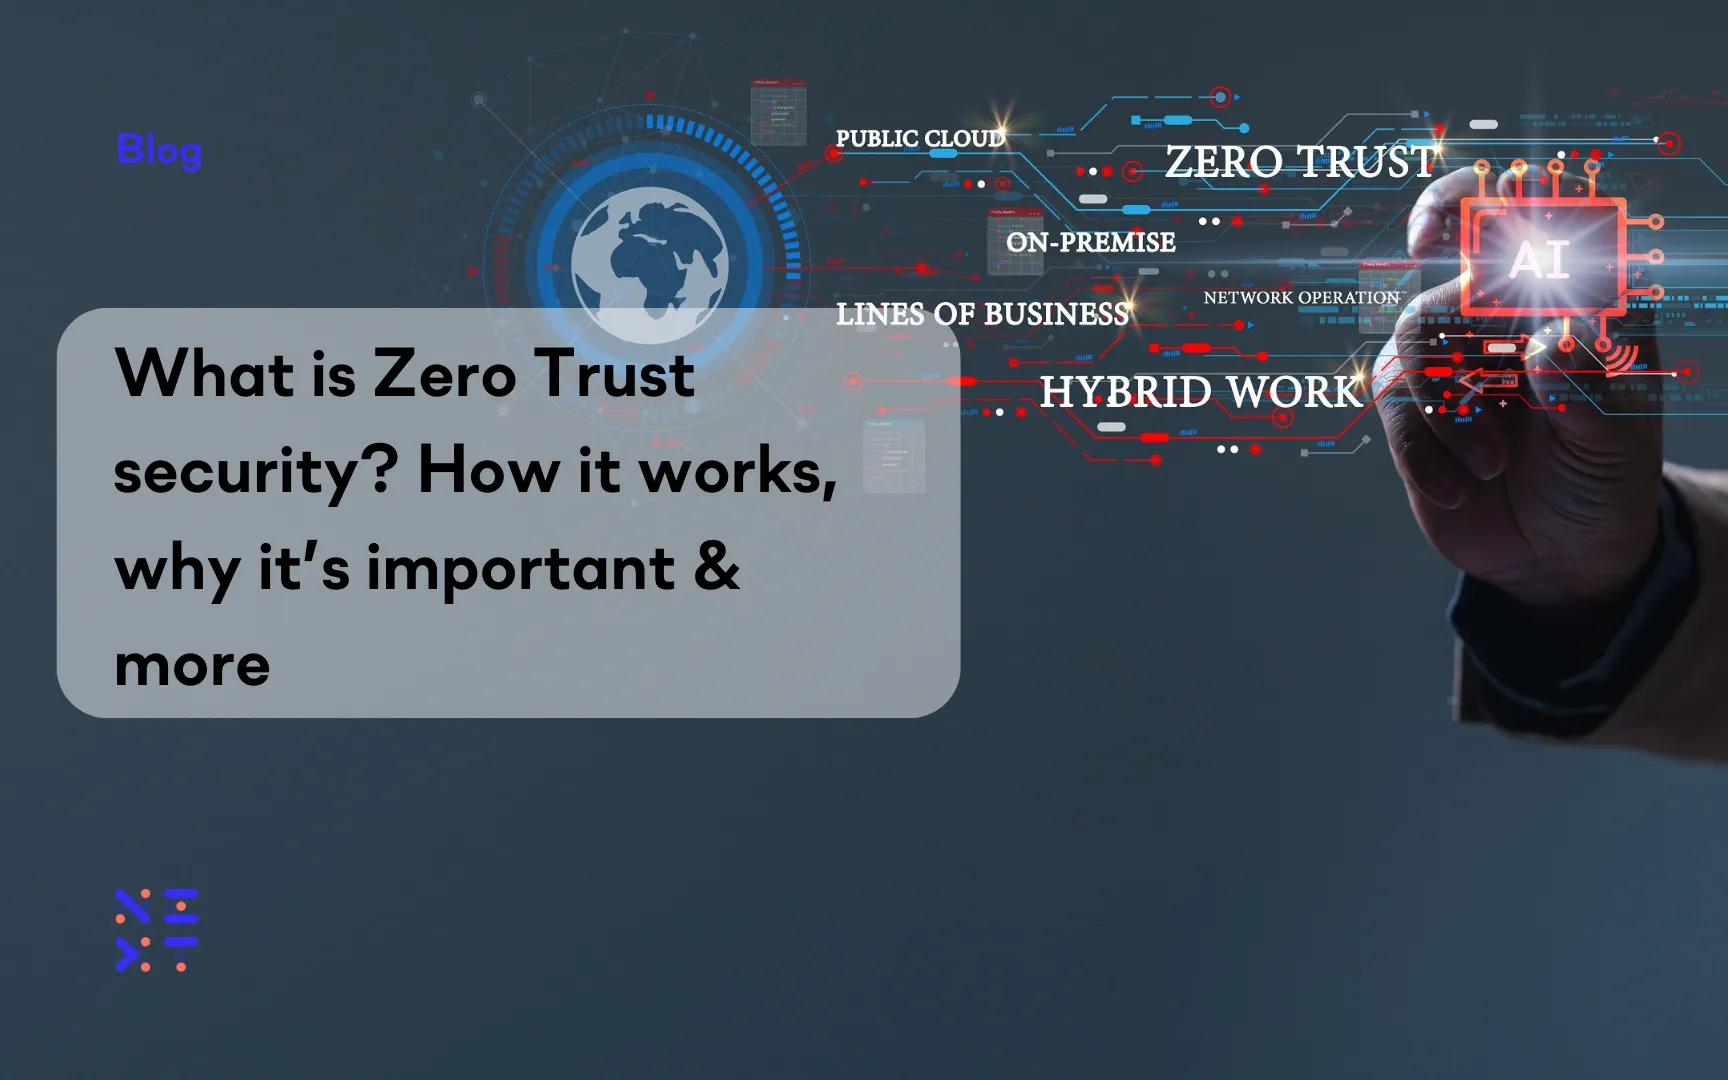 What is Zero Trust security? How it works, why it’s important & more